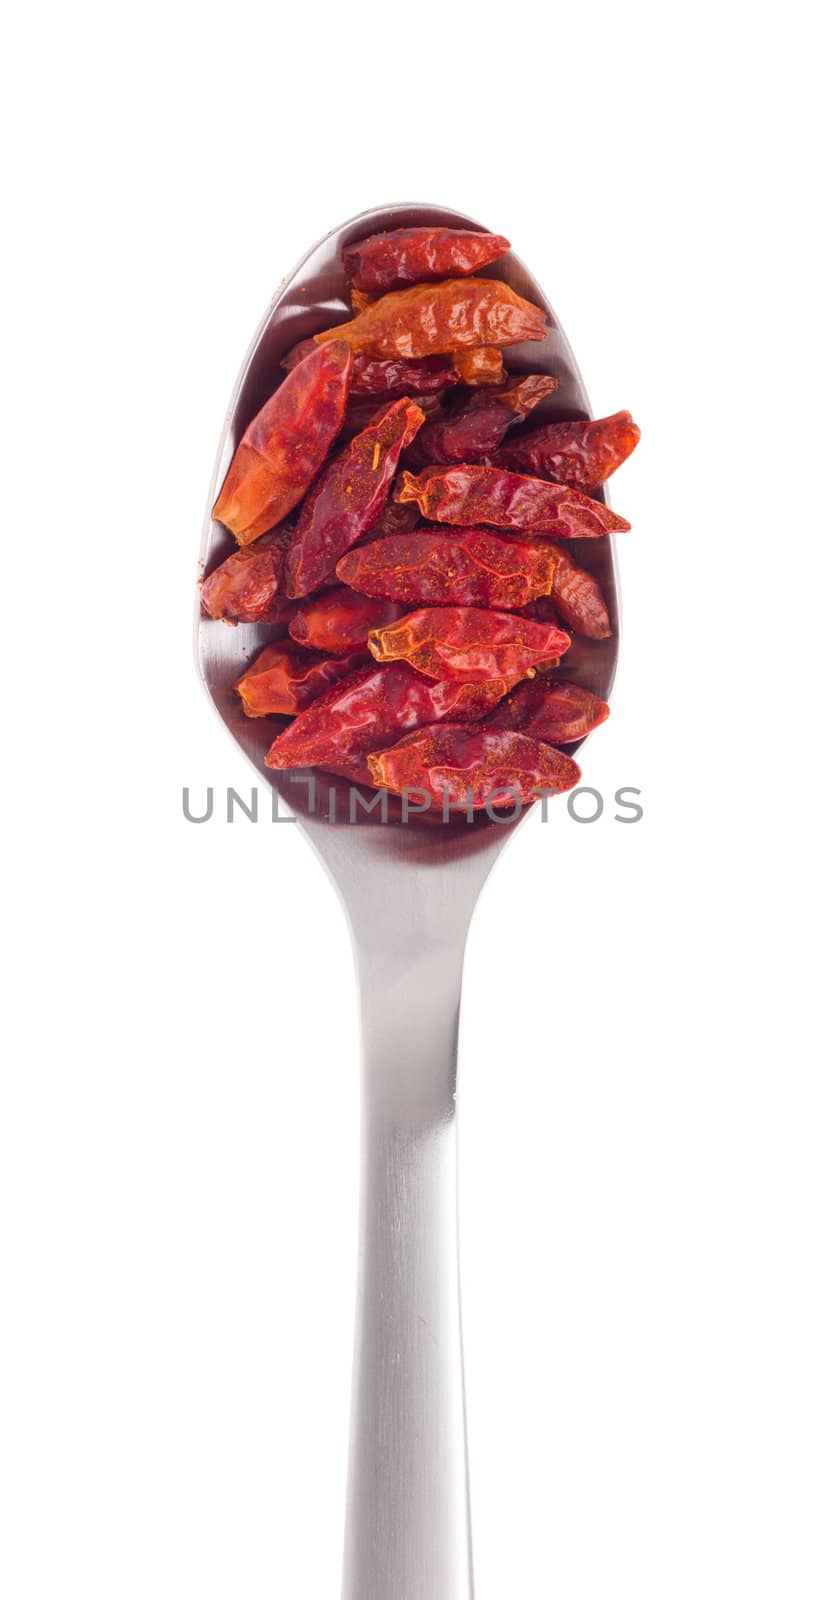 piri-piri spice on a stainless steel spoon, isolated on white background